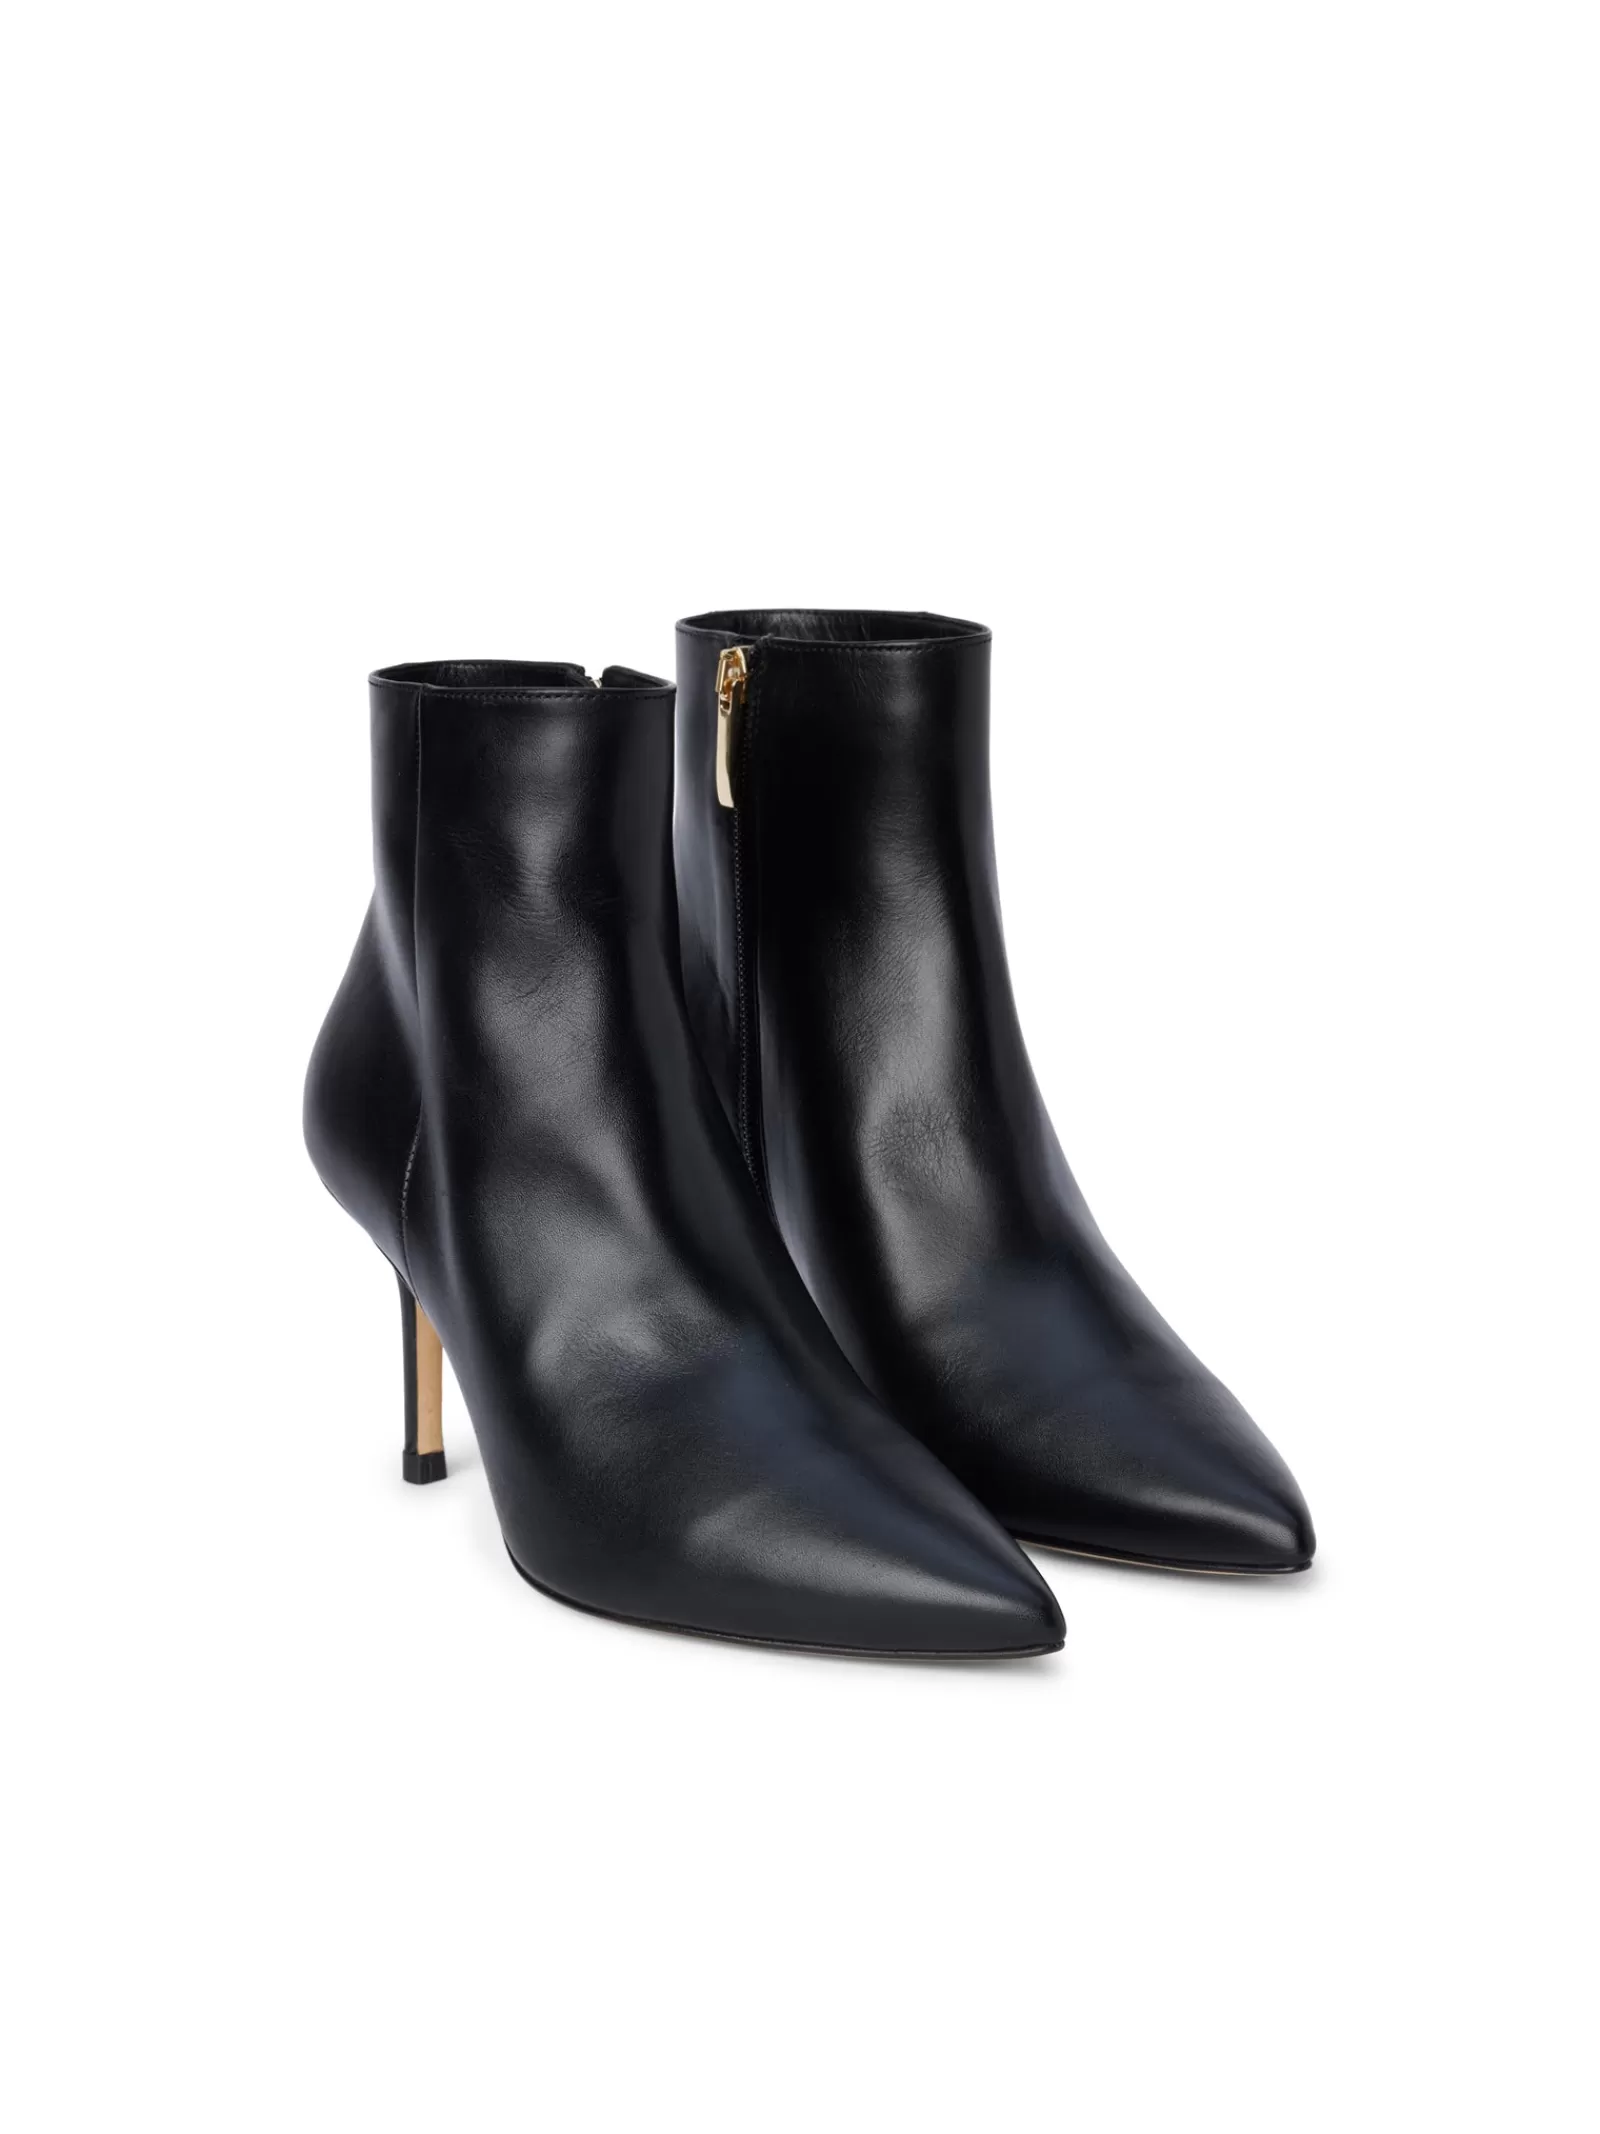 L'AGENCE Aimee Bootie< Boots & Booties | All Things Black